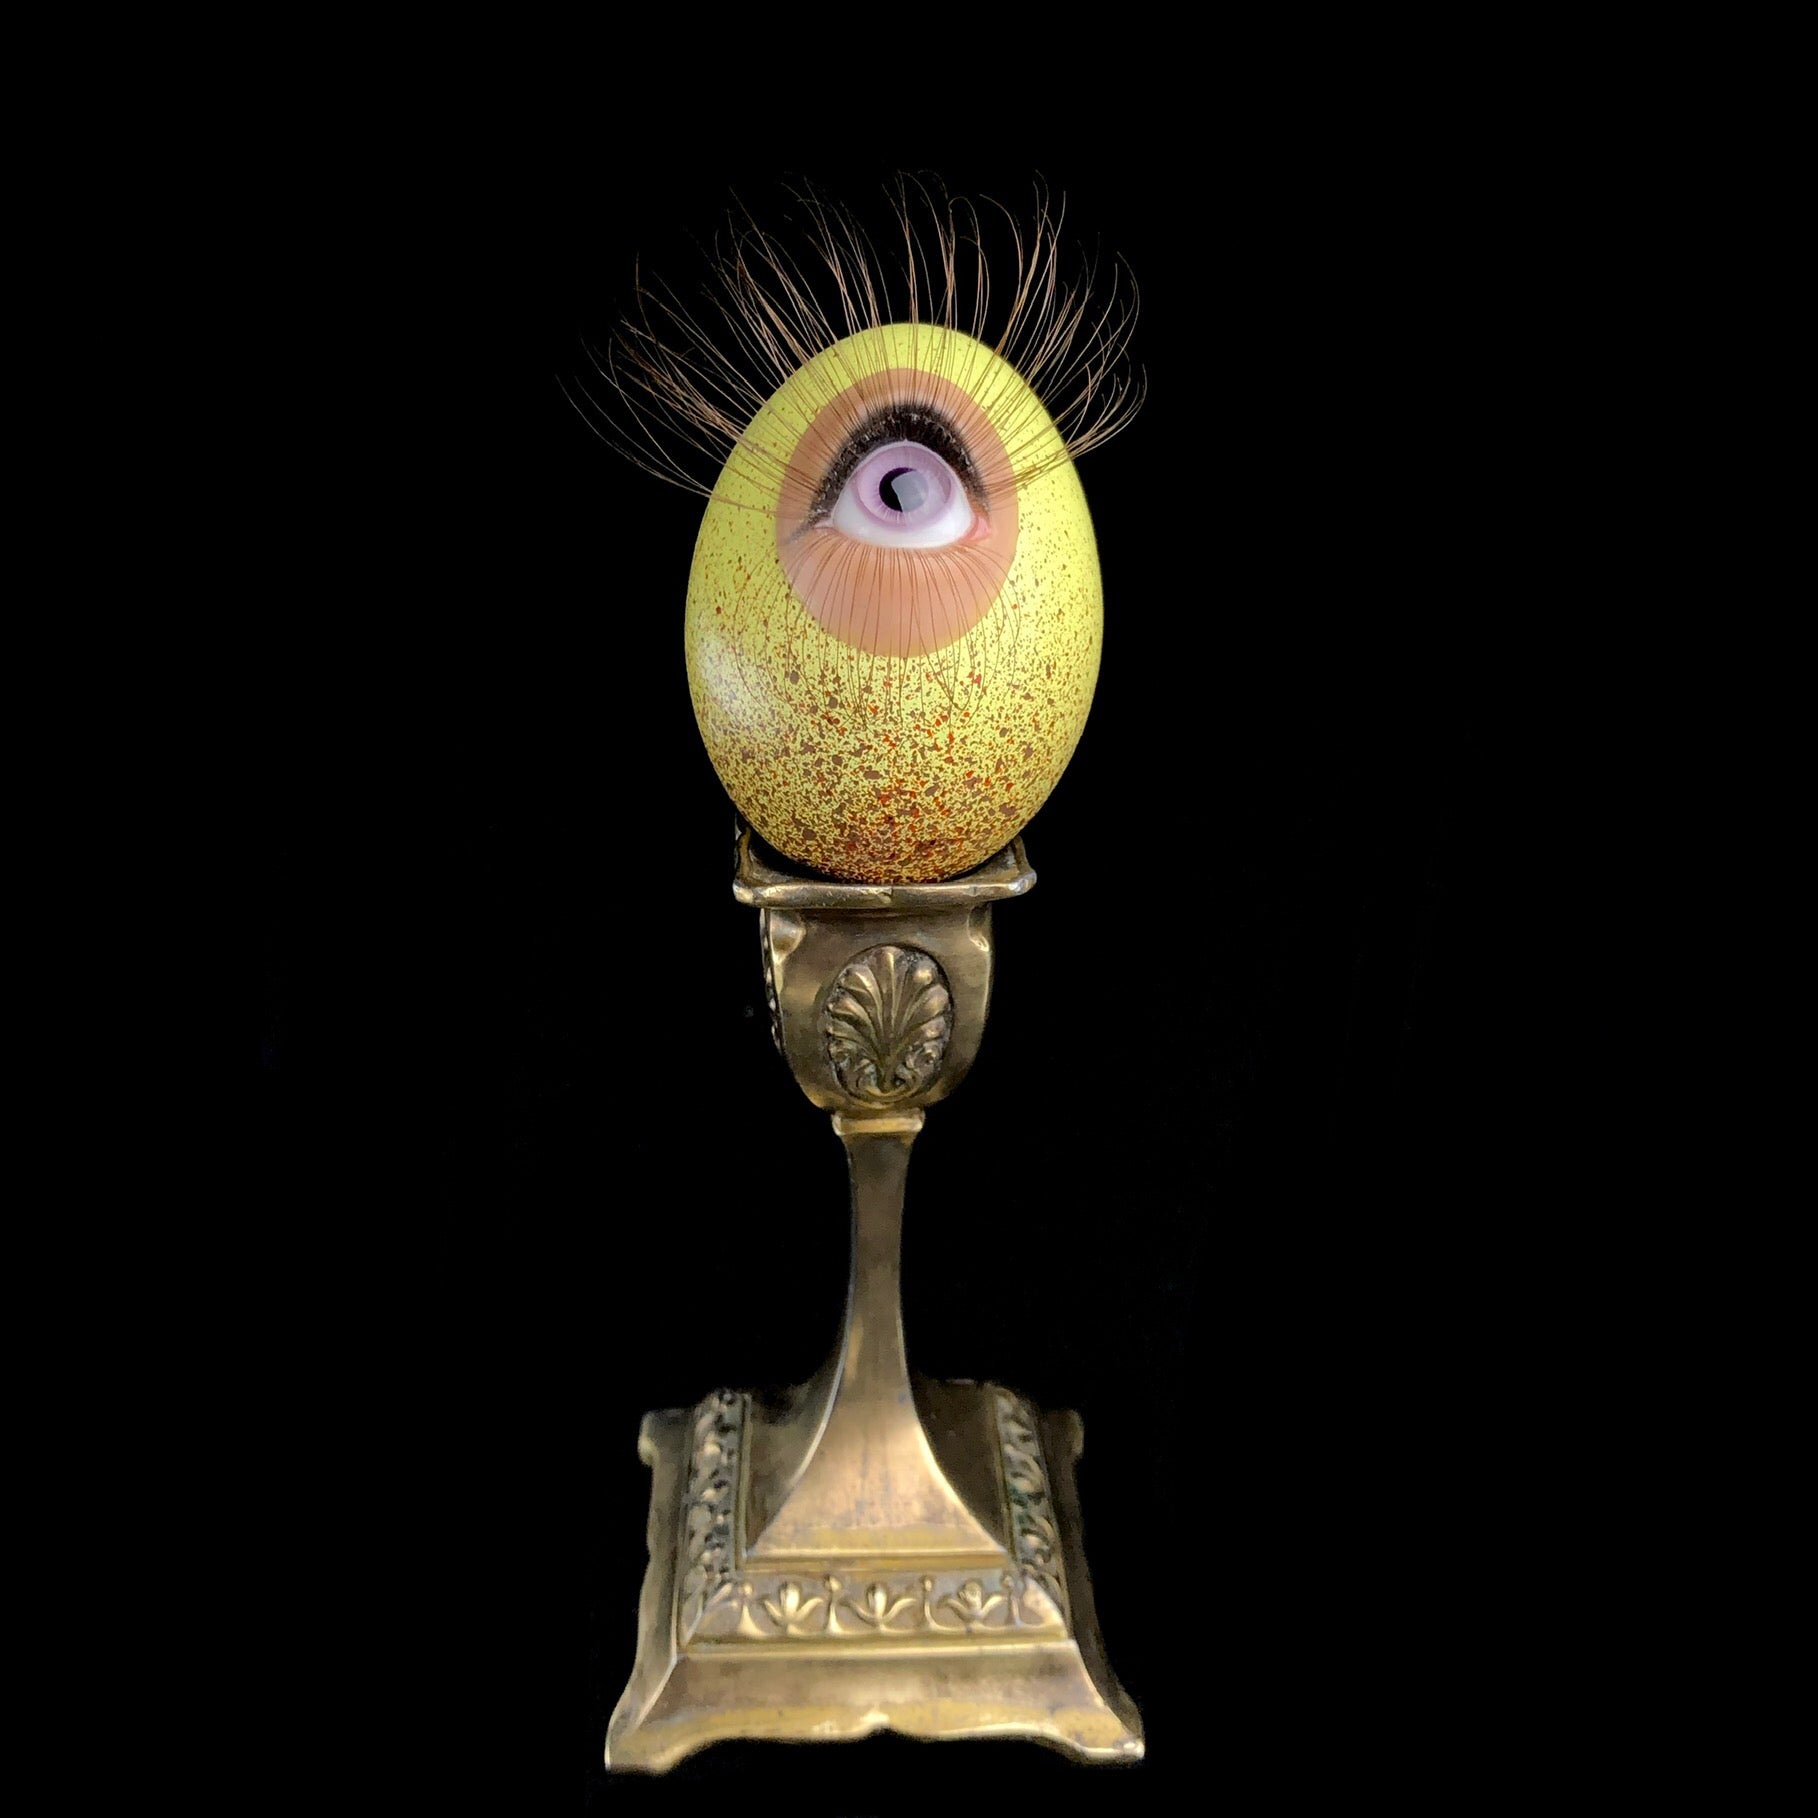 Front view of yellow egg with purple eye and brown eyelashes sitting on brass stand